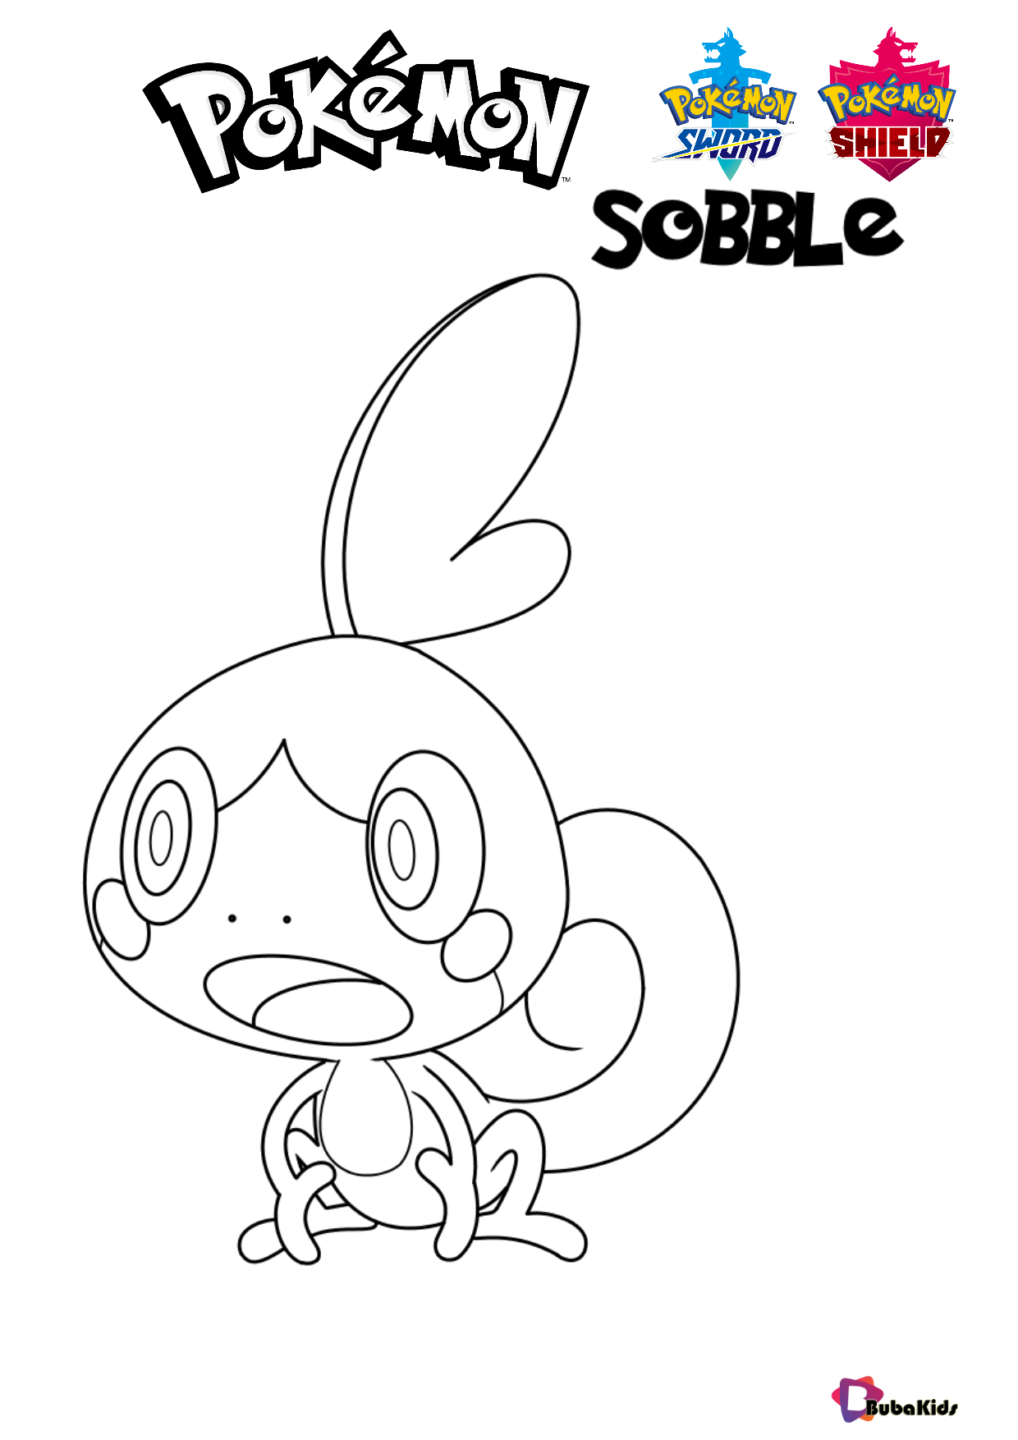 pokemon sword and shield pokemon sobble coloring pages